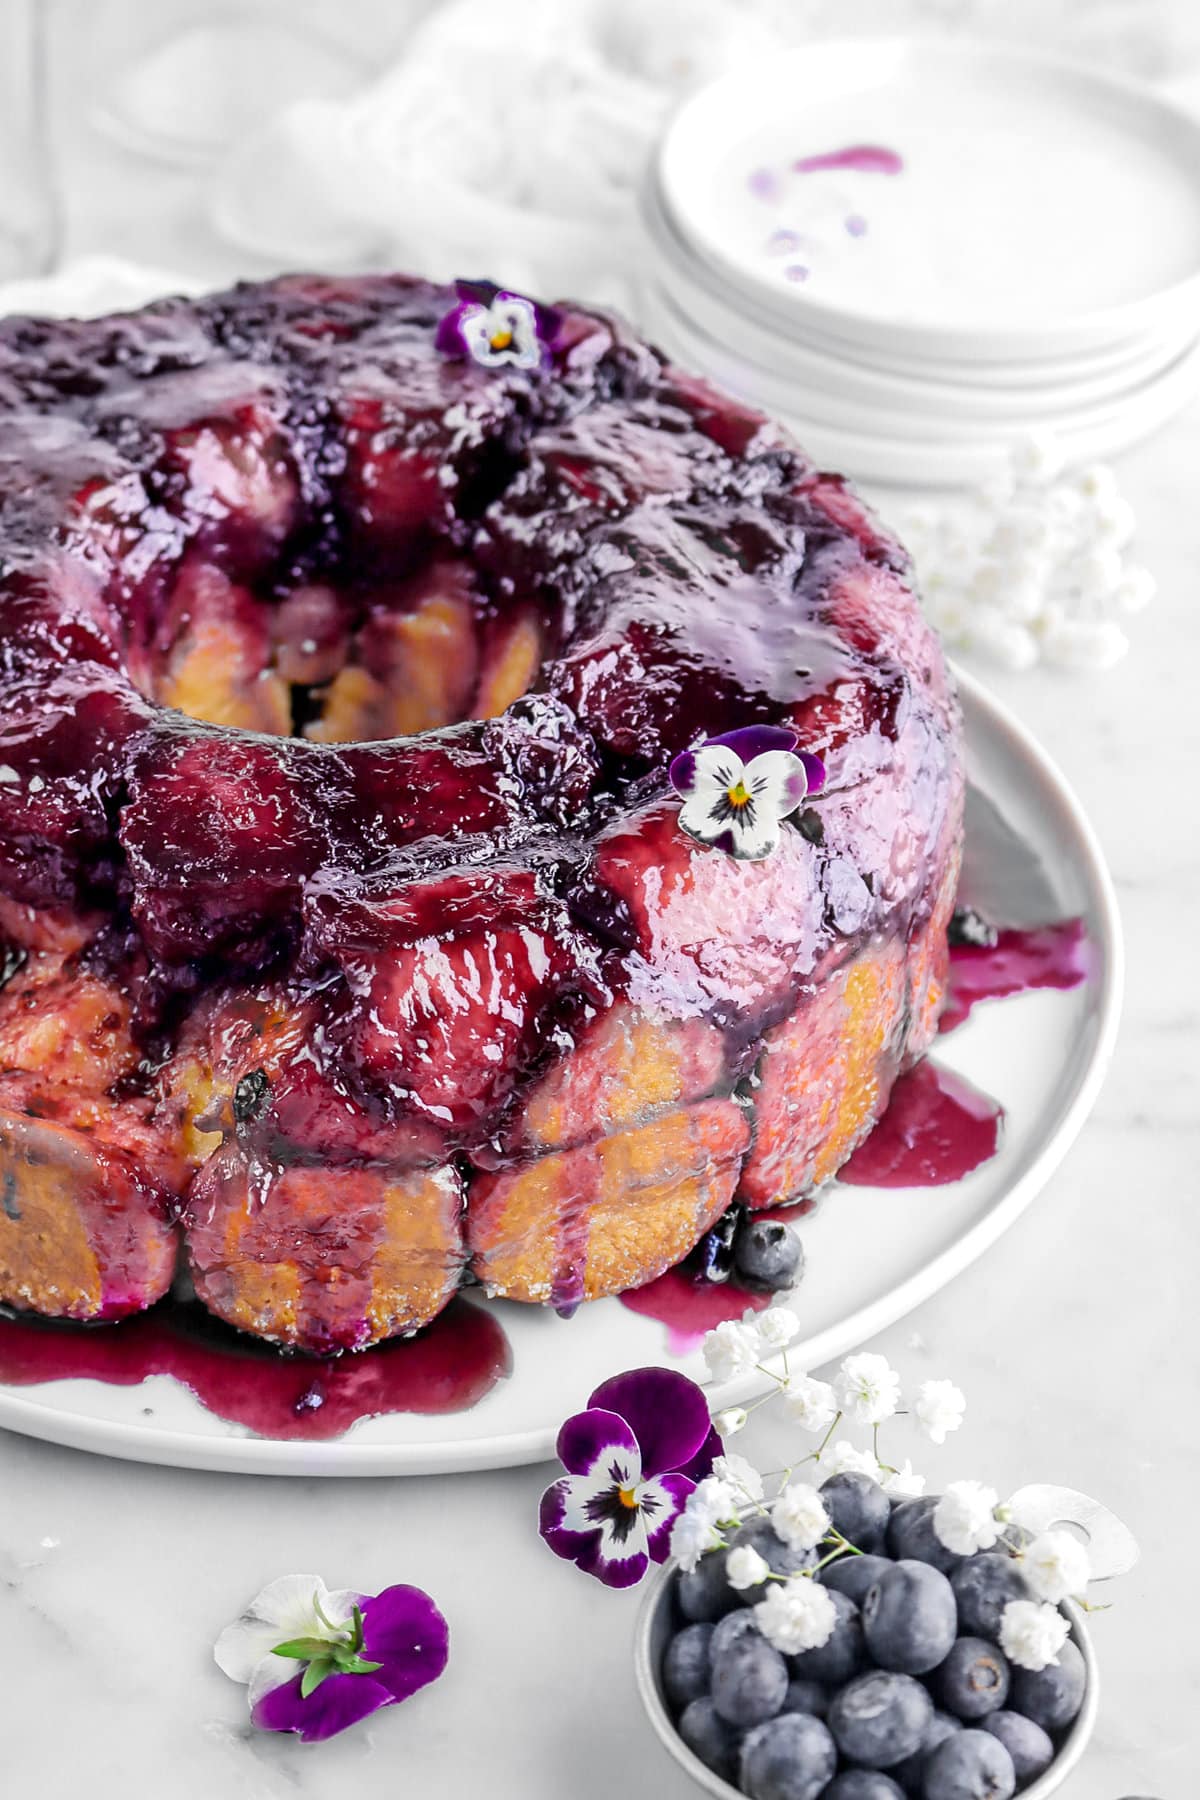 cropped image of lemon blueberry monkey bread with violas and blueberries around.